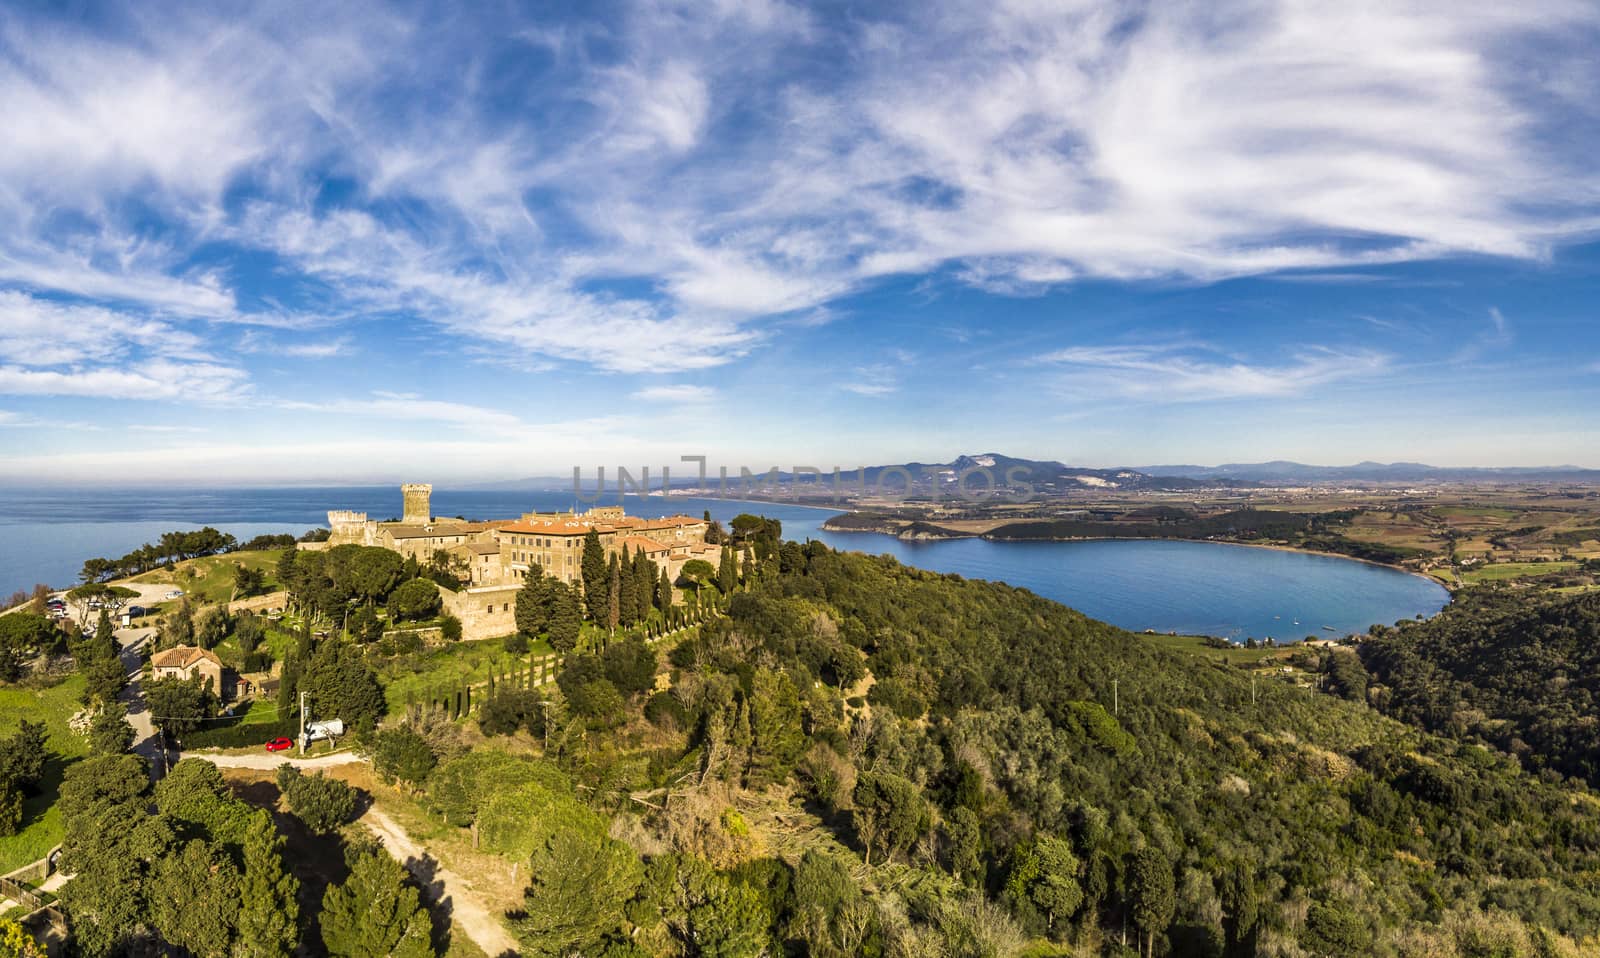 Tuscany, Populonia coastline, view from a drone.